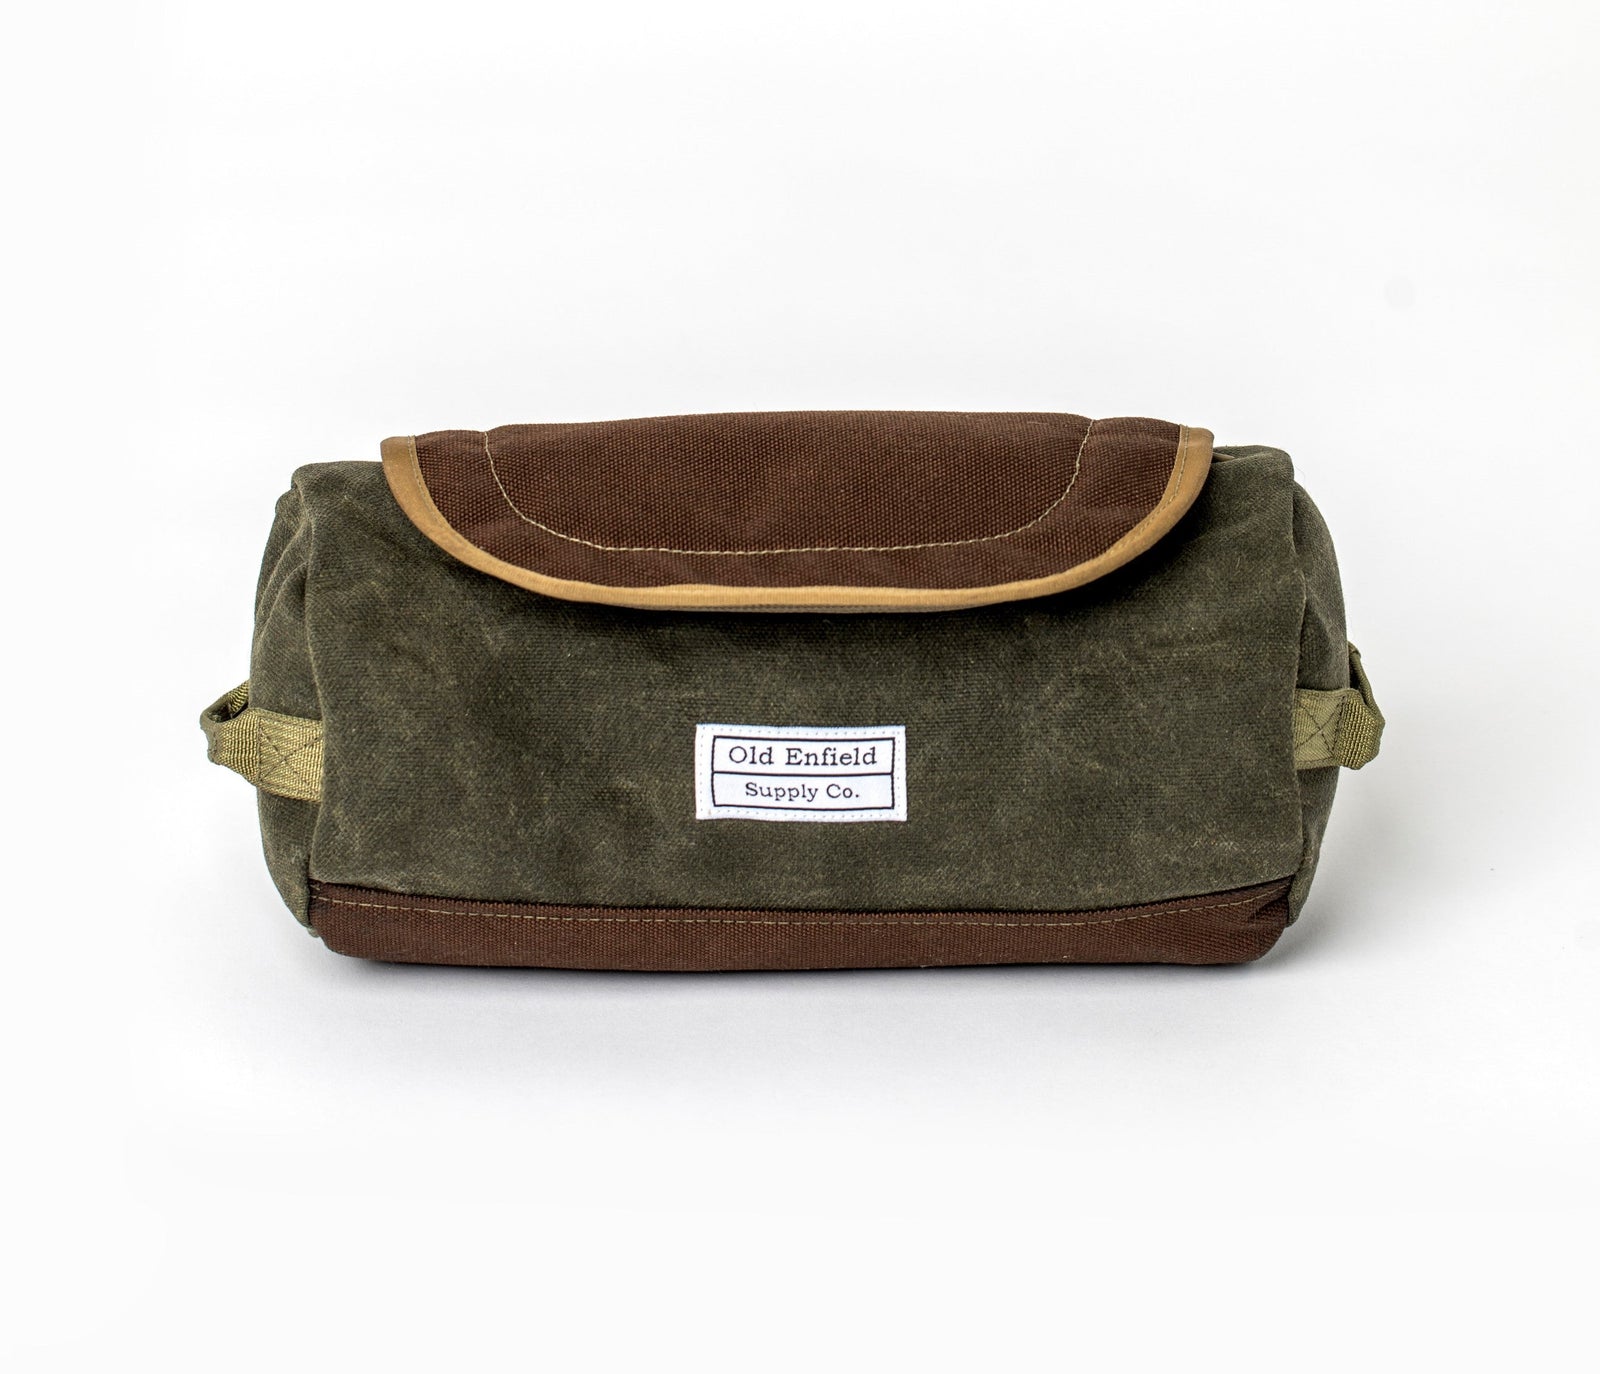 Leather Toiletry Kit by WP Standard - Cobbler Union